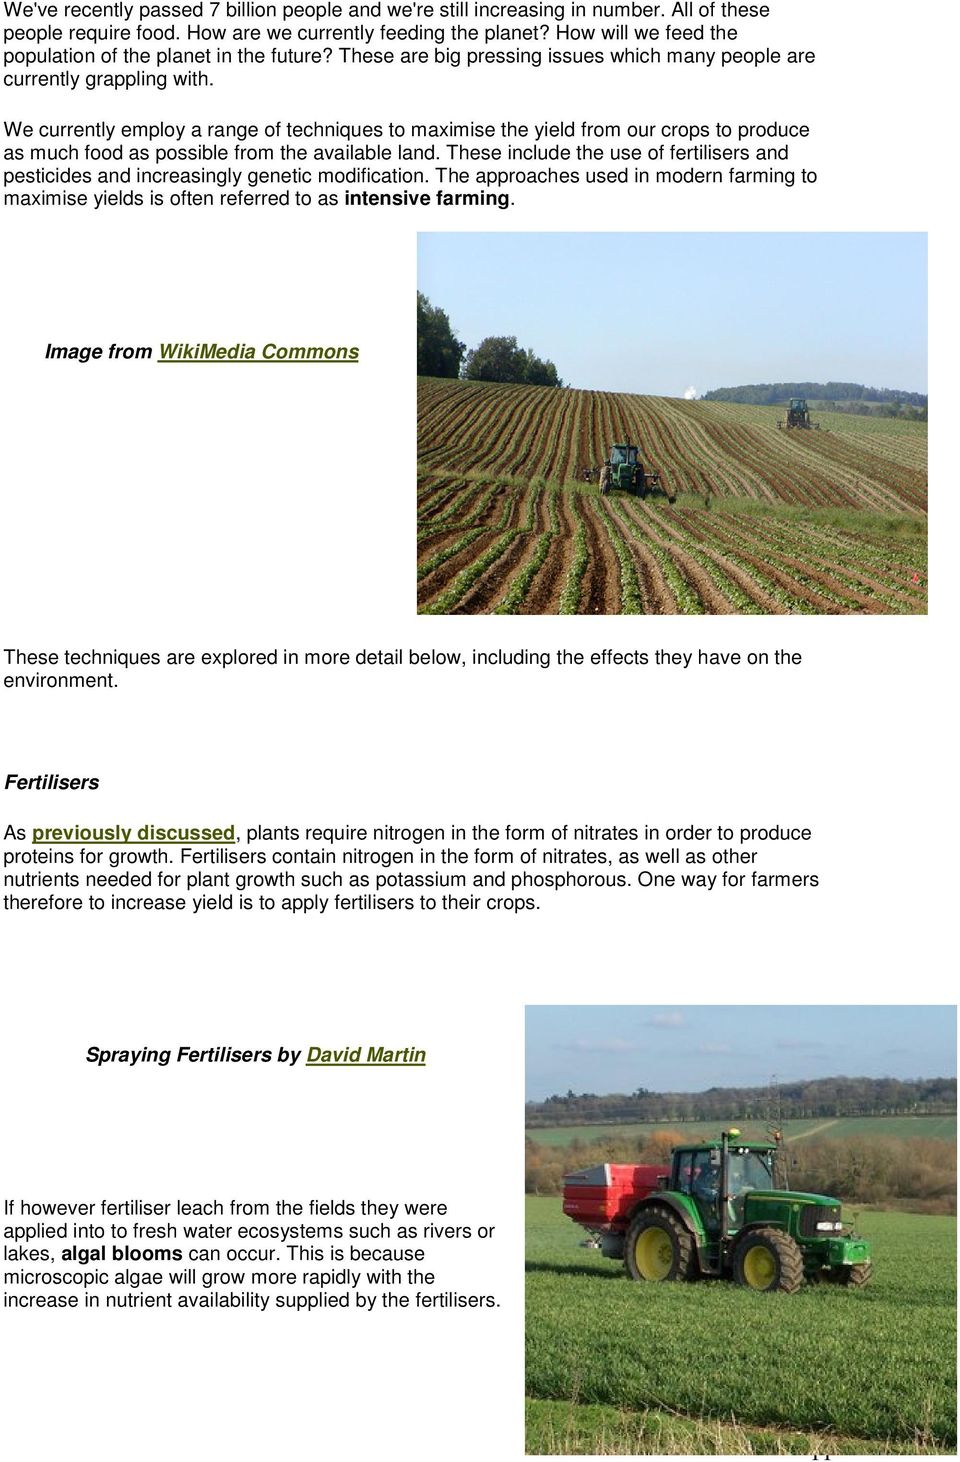 We currently employ a range of techniques to maximise the yield from our crops to produce as much food as possible from the available land.